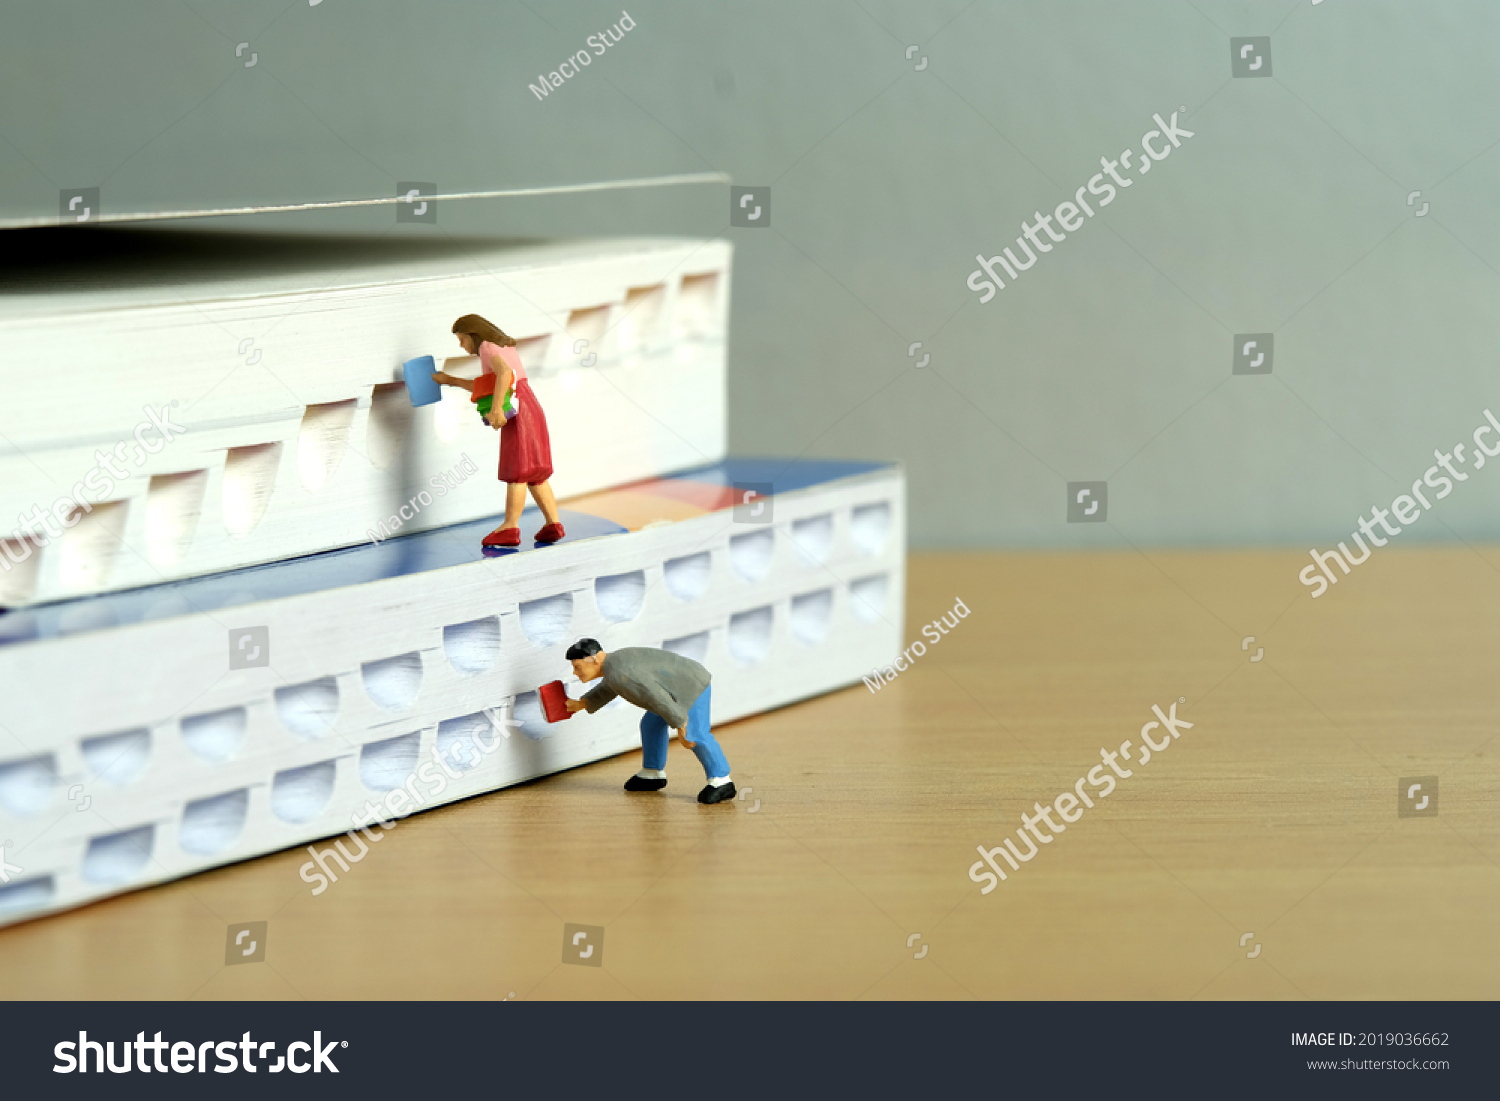 Miniature people toy figure photography. Bookshelf library concept. A group of student pupil returning and borrow a book. Image photo #2019036662